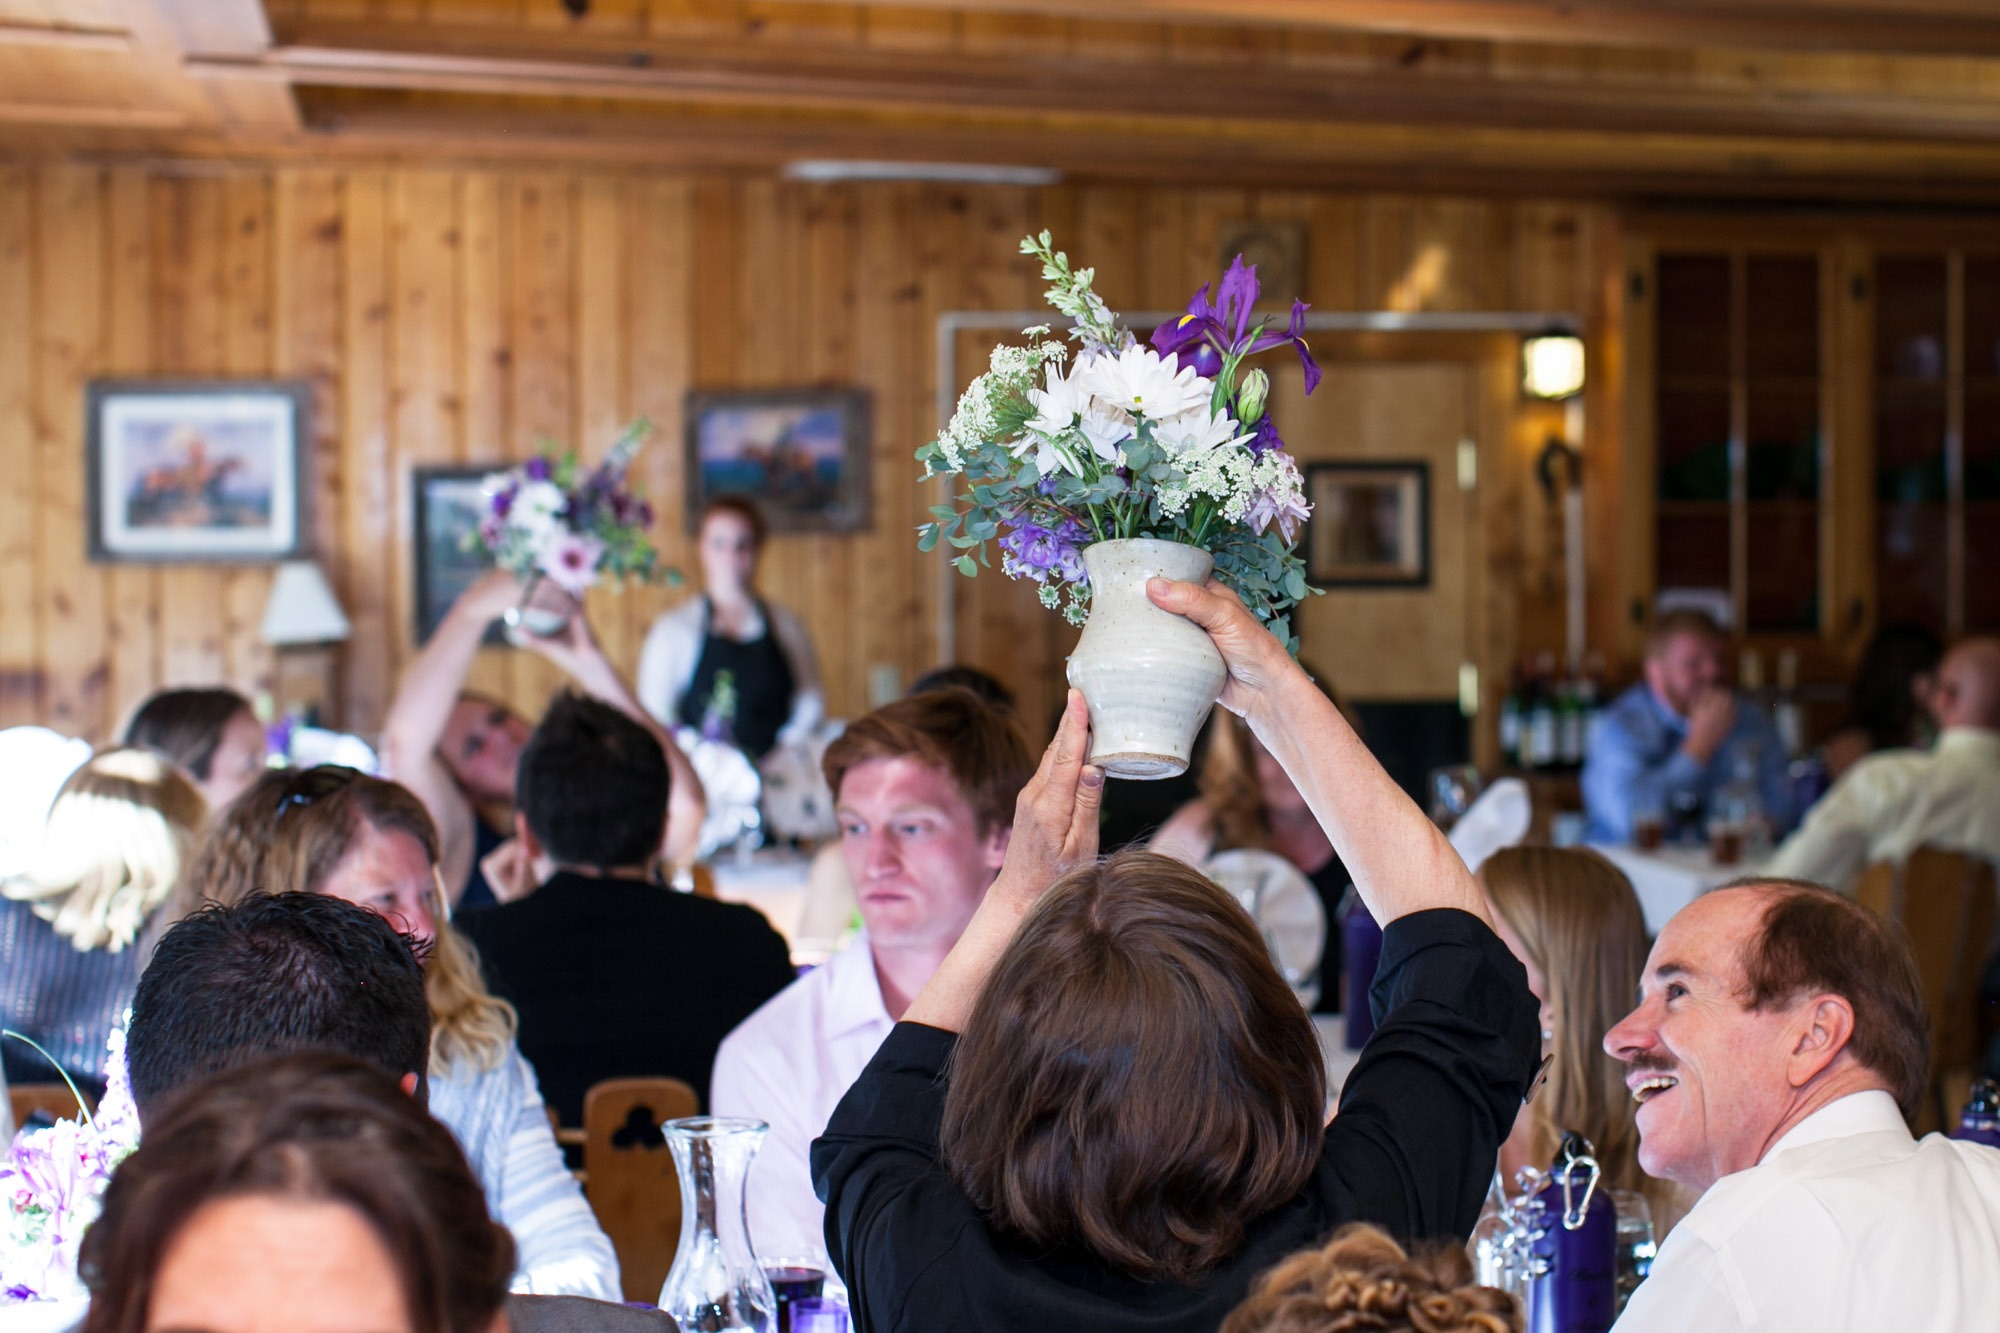 a woman sitting at a wedding table picks up a vase of flowers and looks at the bottom of the vase